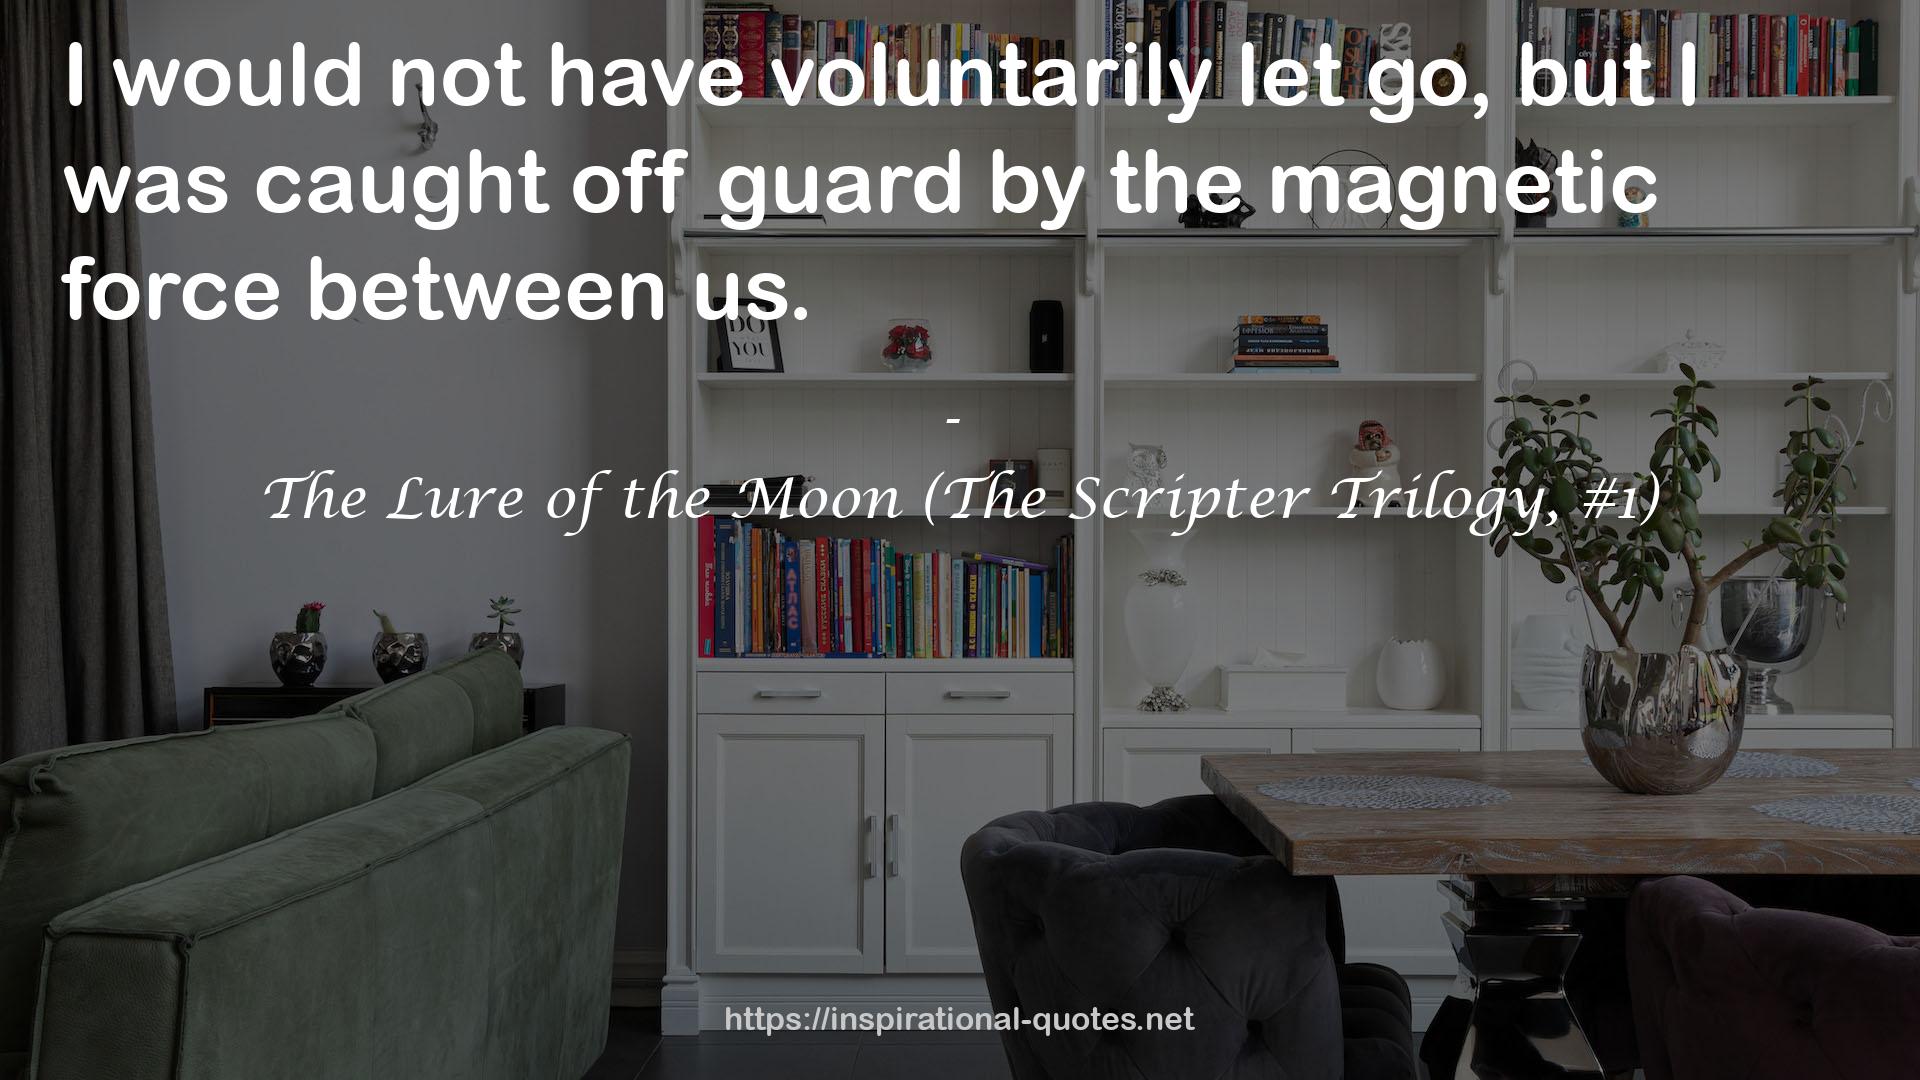 The Lure of the Moon (The Scripter Trilogy, #1) QUOTES